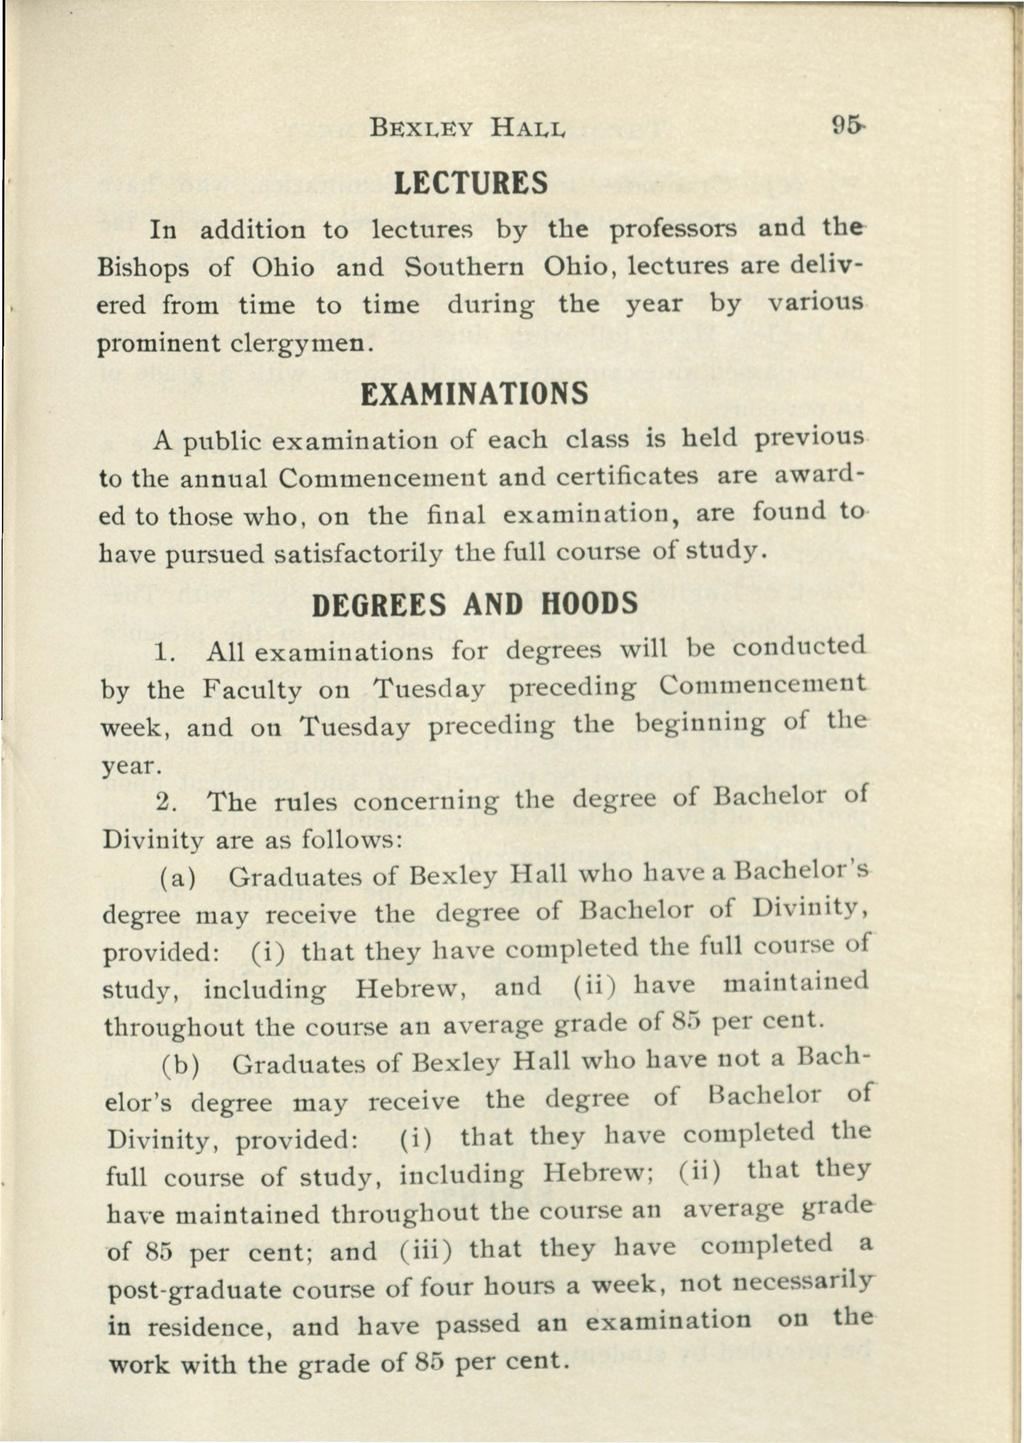 BEXLEY HALL 95- LECTURES In addition to lectures by the professors and the Bishops of Ohio and Southern Ohio, lectures are delivered from time to time during the year by various prominent clergymen.